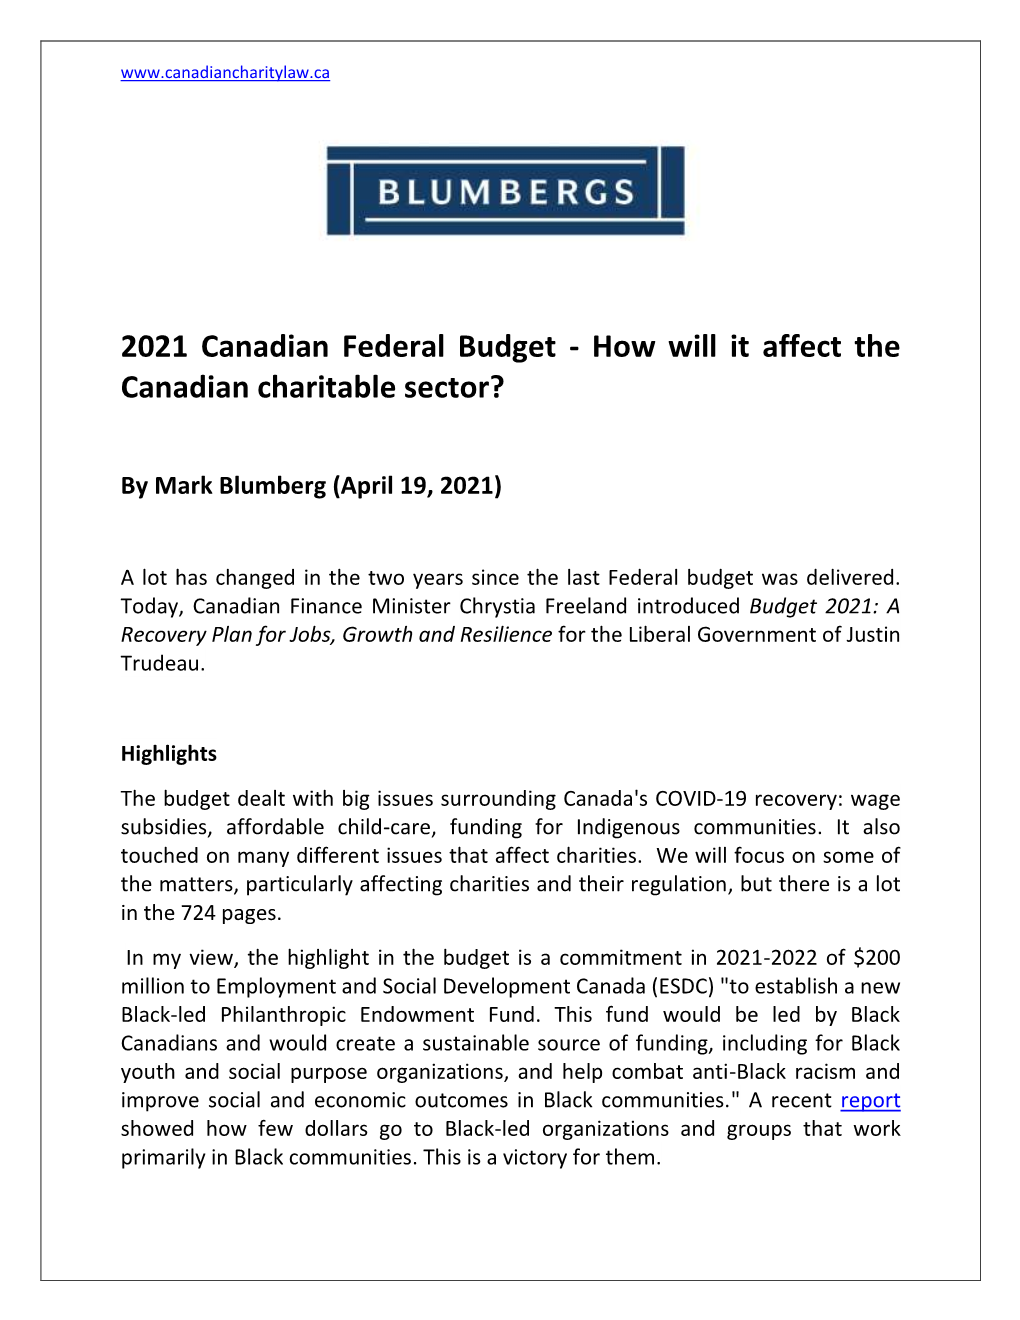 2021 Canadian Federal Budget and Its Impact on the Canadian Charitable Sector